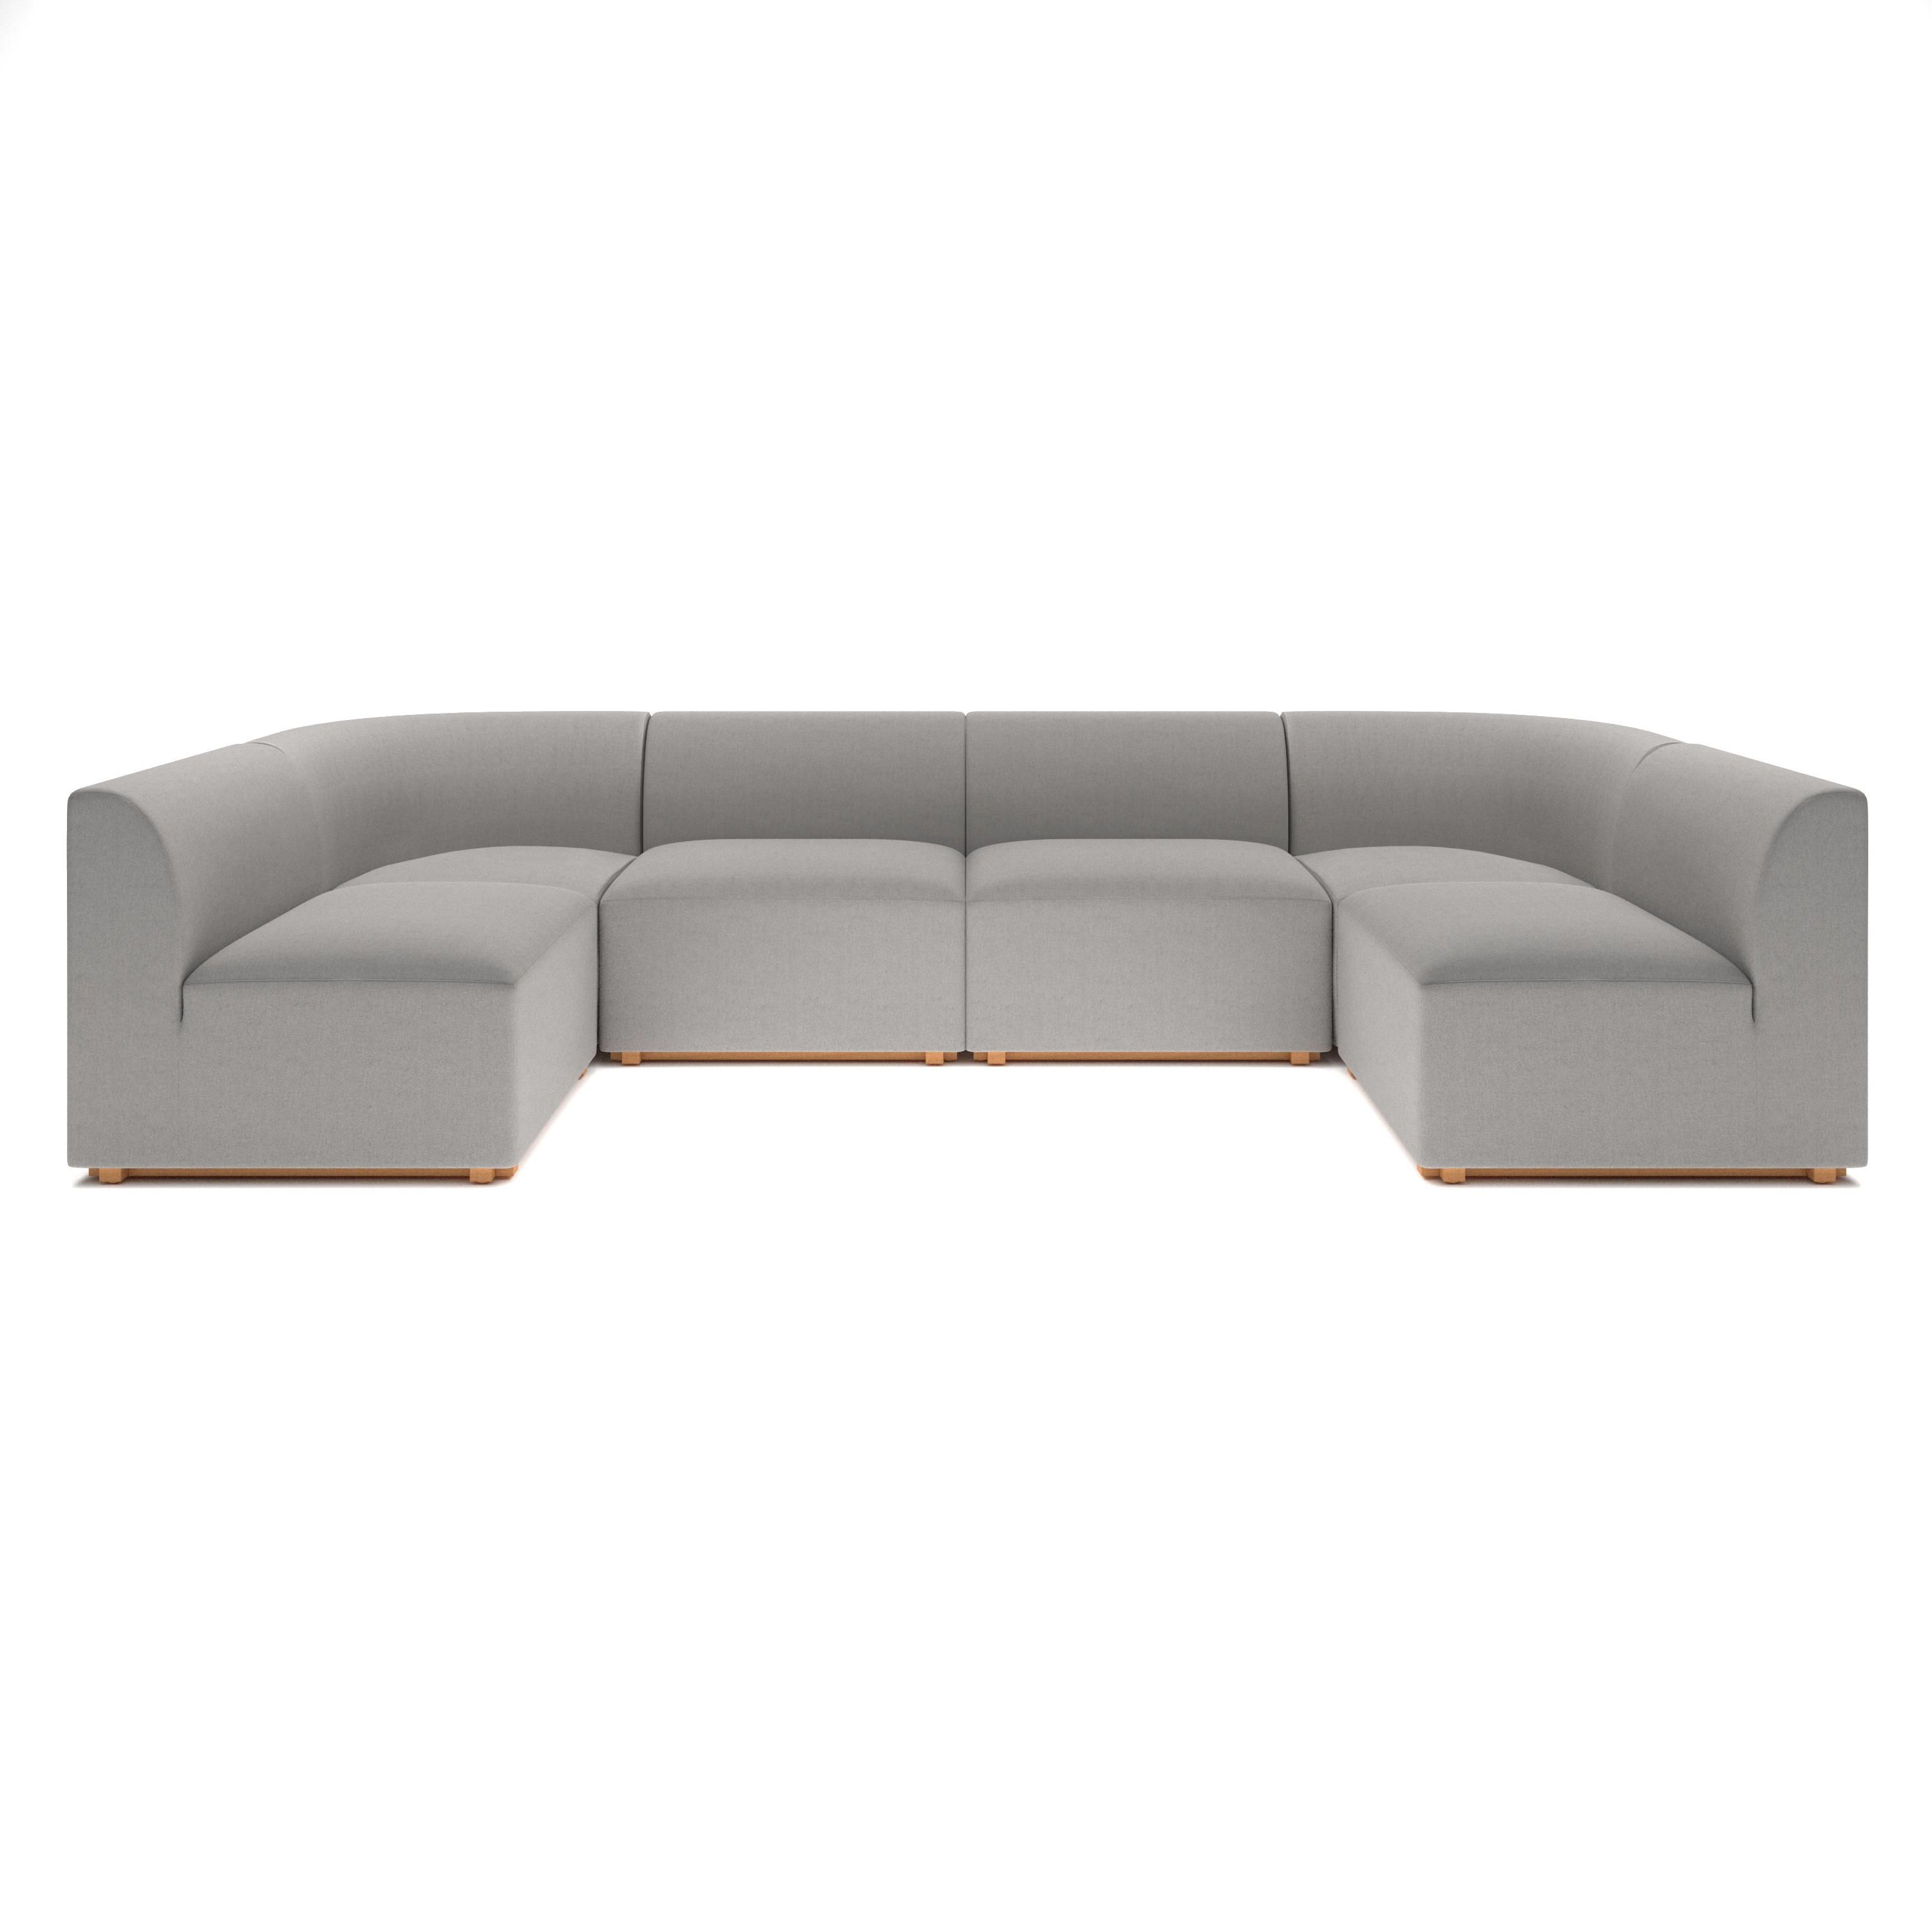 Blockhouse Modular Sectional – 6 Seat U Shaped Sofa | Rypen Collections |  Rypen Throughout 6 Seater Modular Sectional Sofas (Gallery 8 of 20)